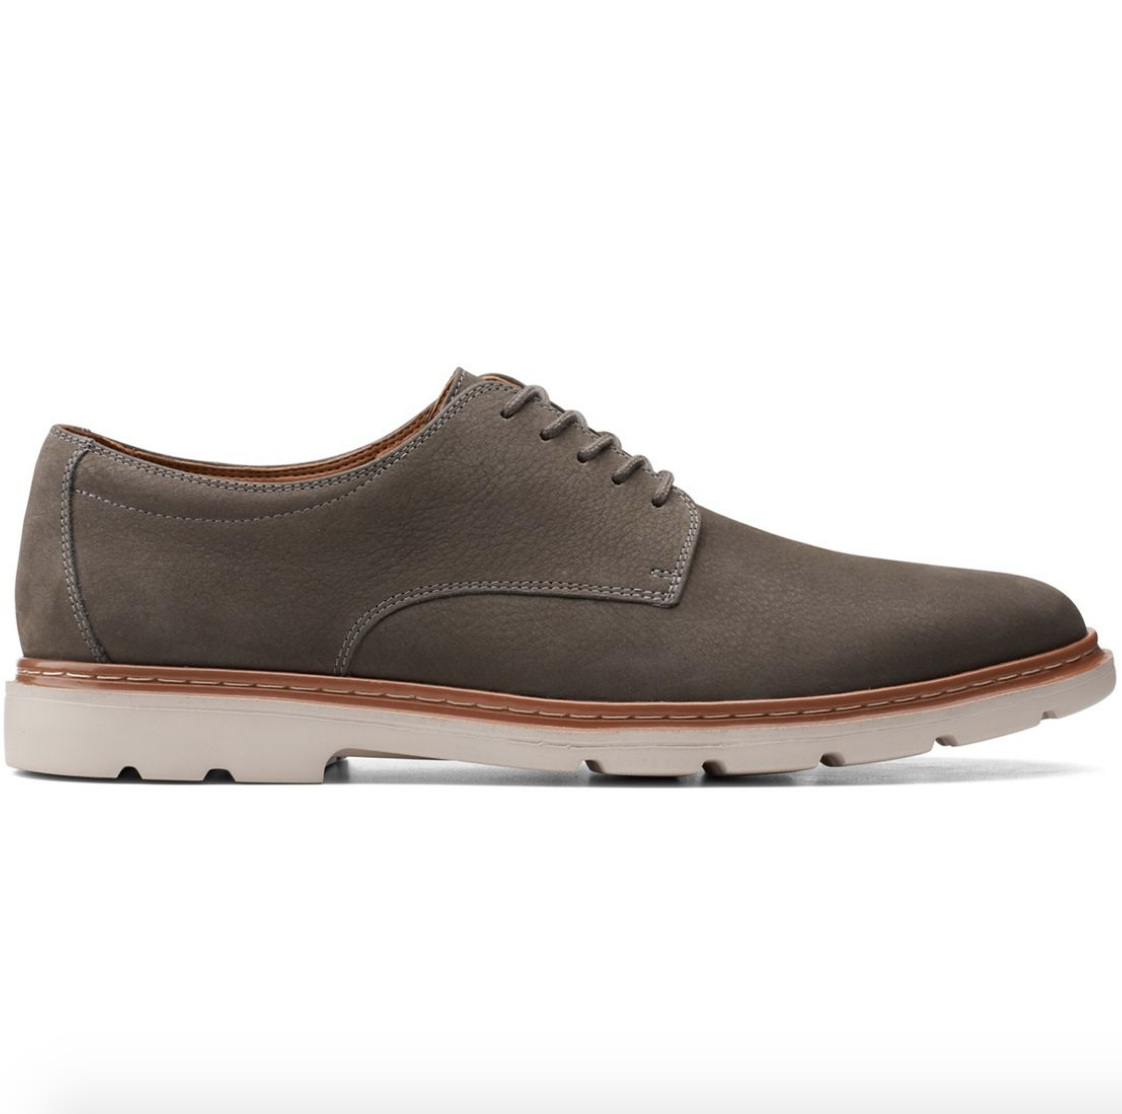 Clarks Canada: Sale Items From $59.99